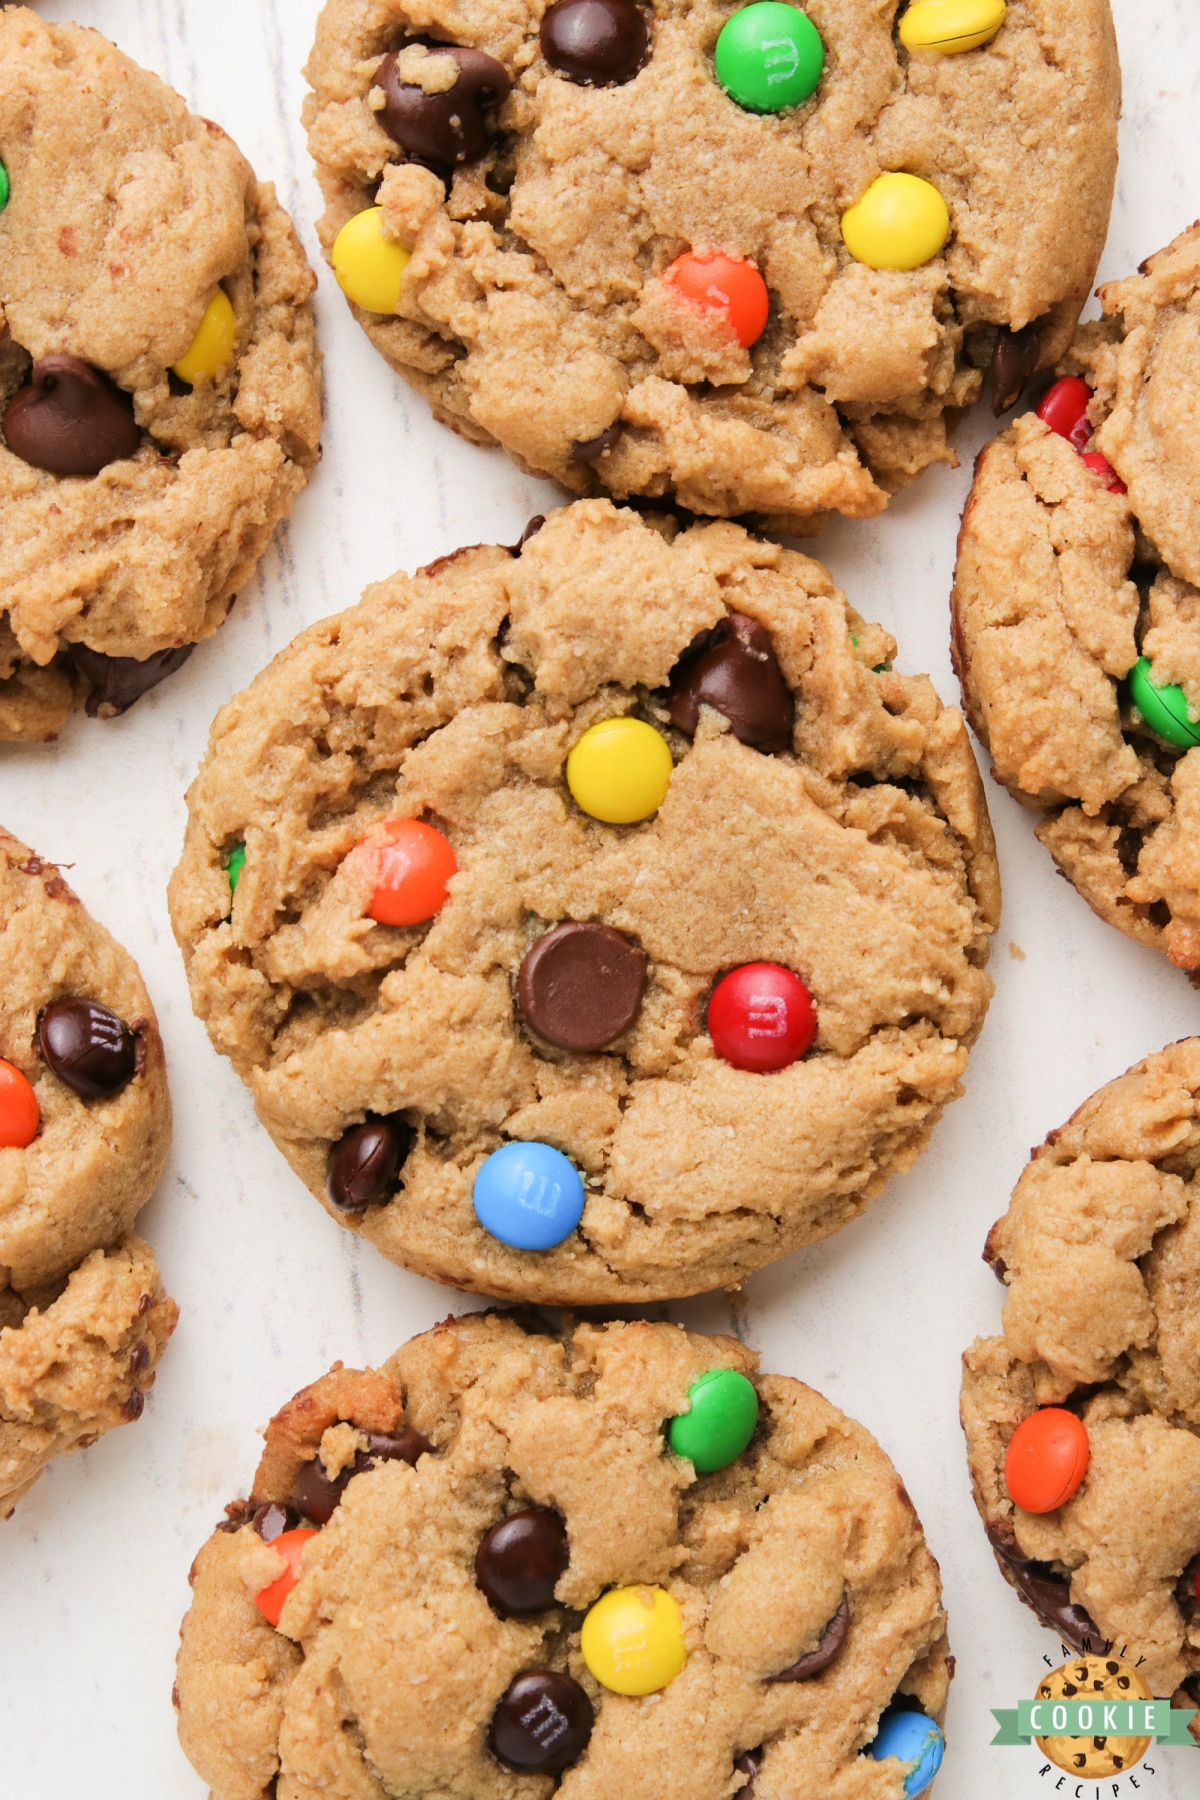 Monster cookie recipe with peanut butter, oats and M&Ms